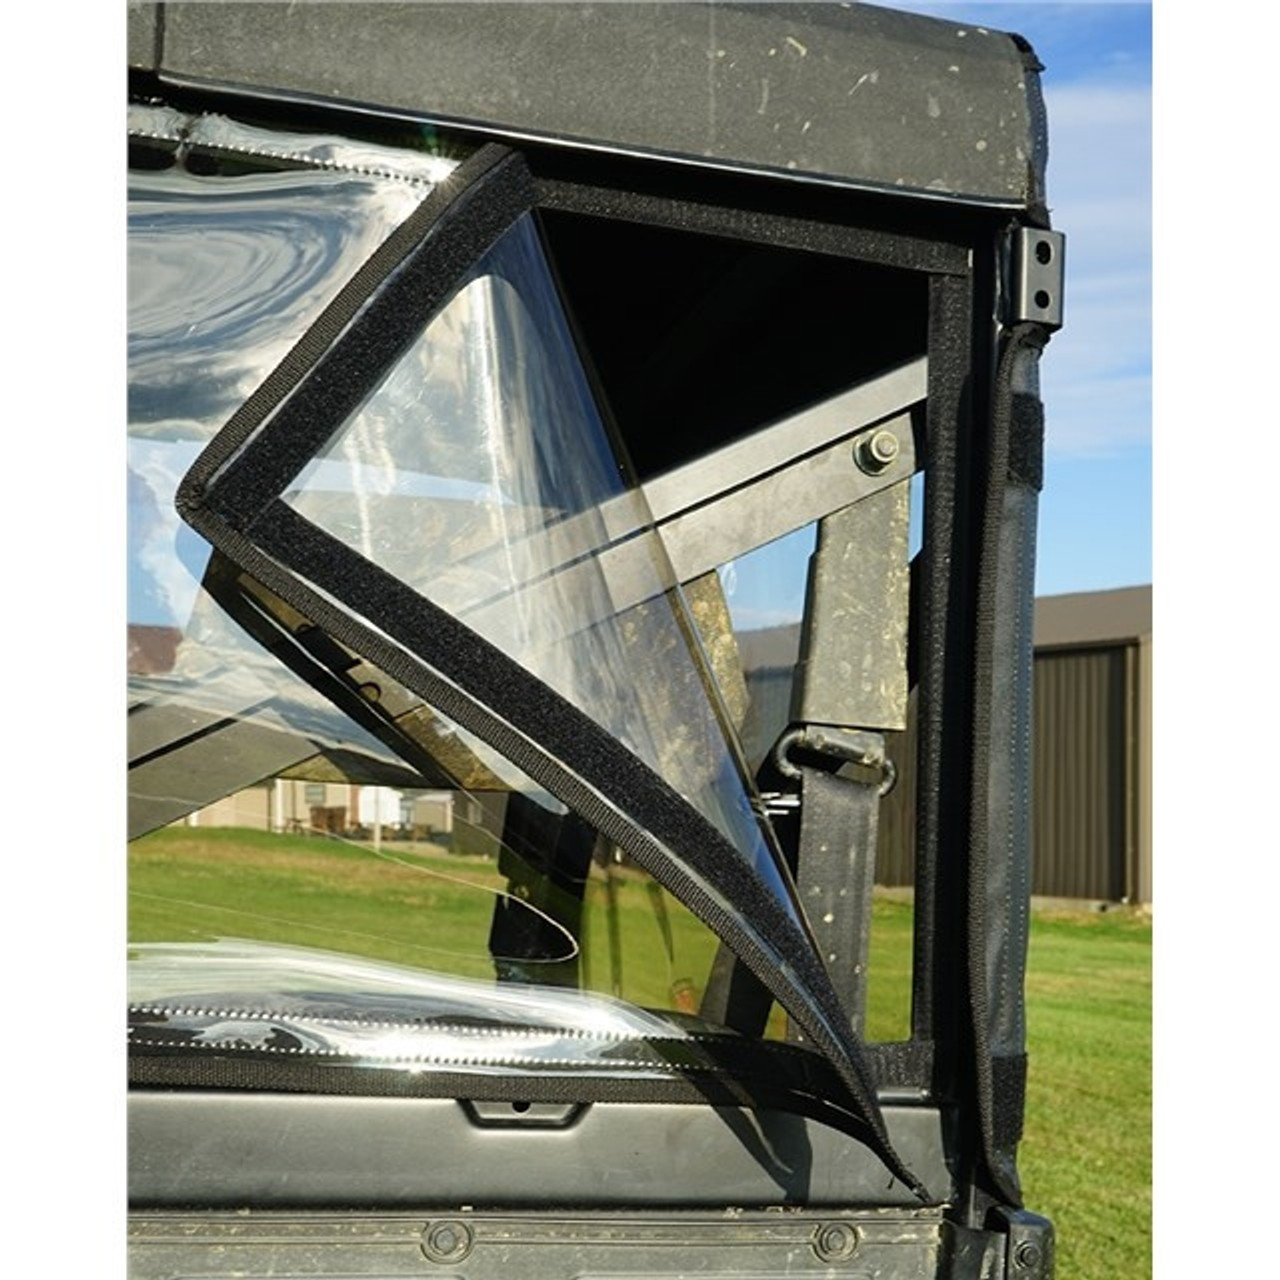 Polaris Rzr 570/800/900 Soft Full Doors And Rear Window Combo For